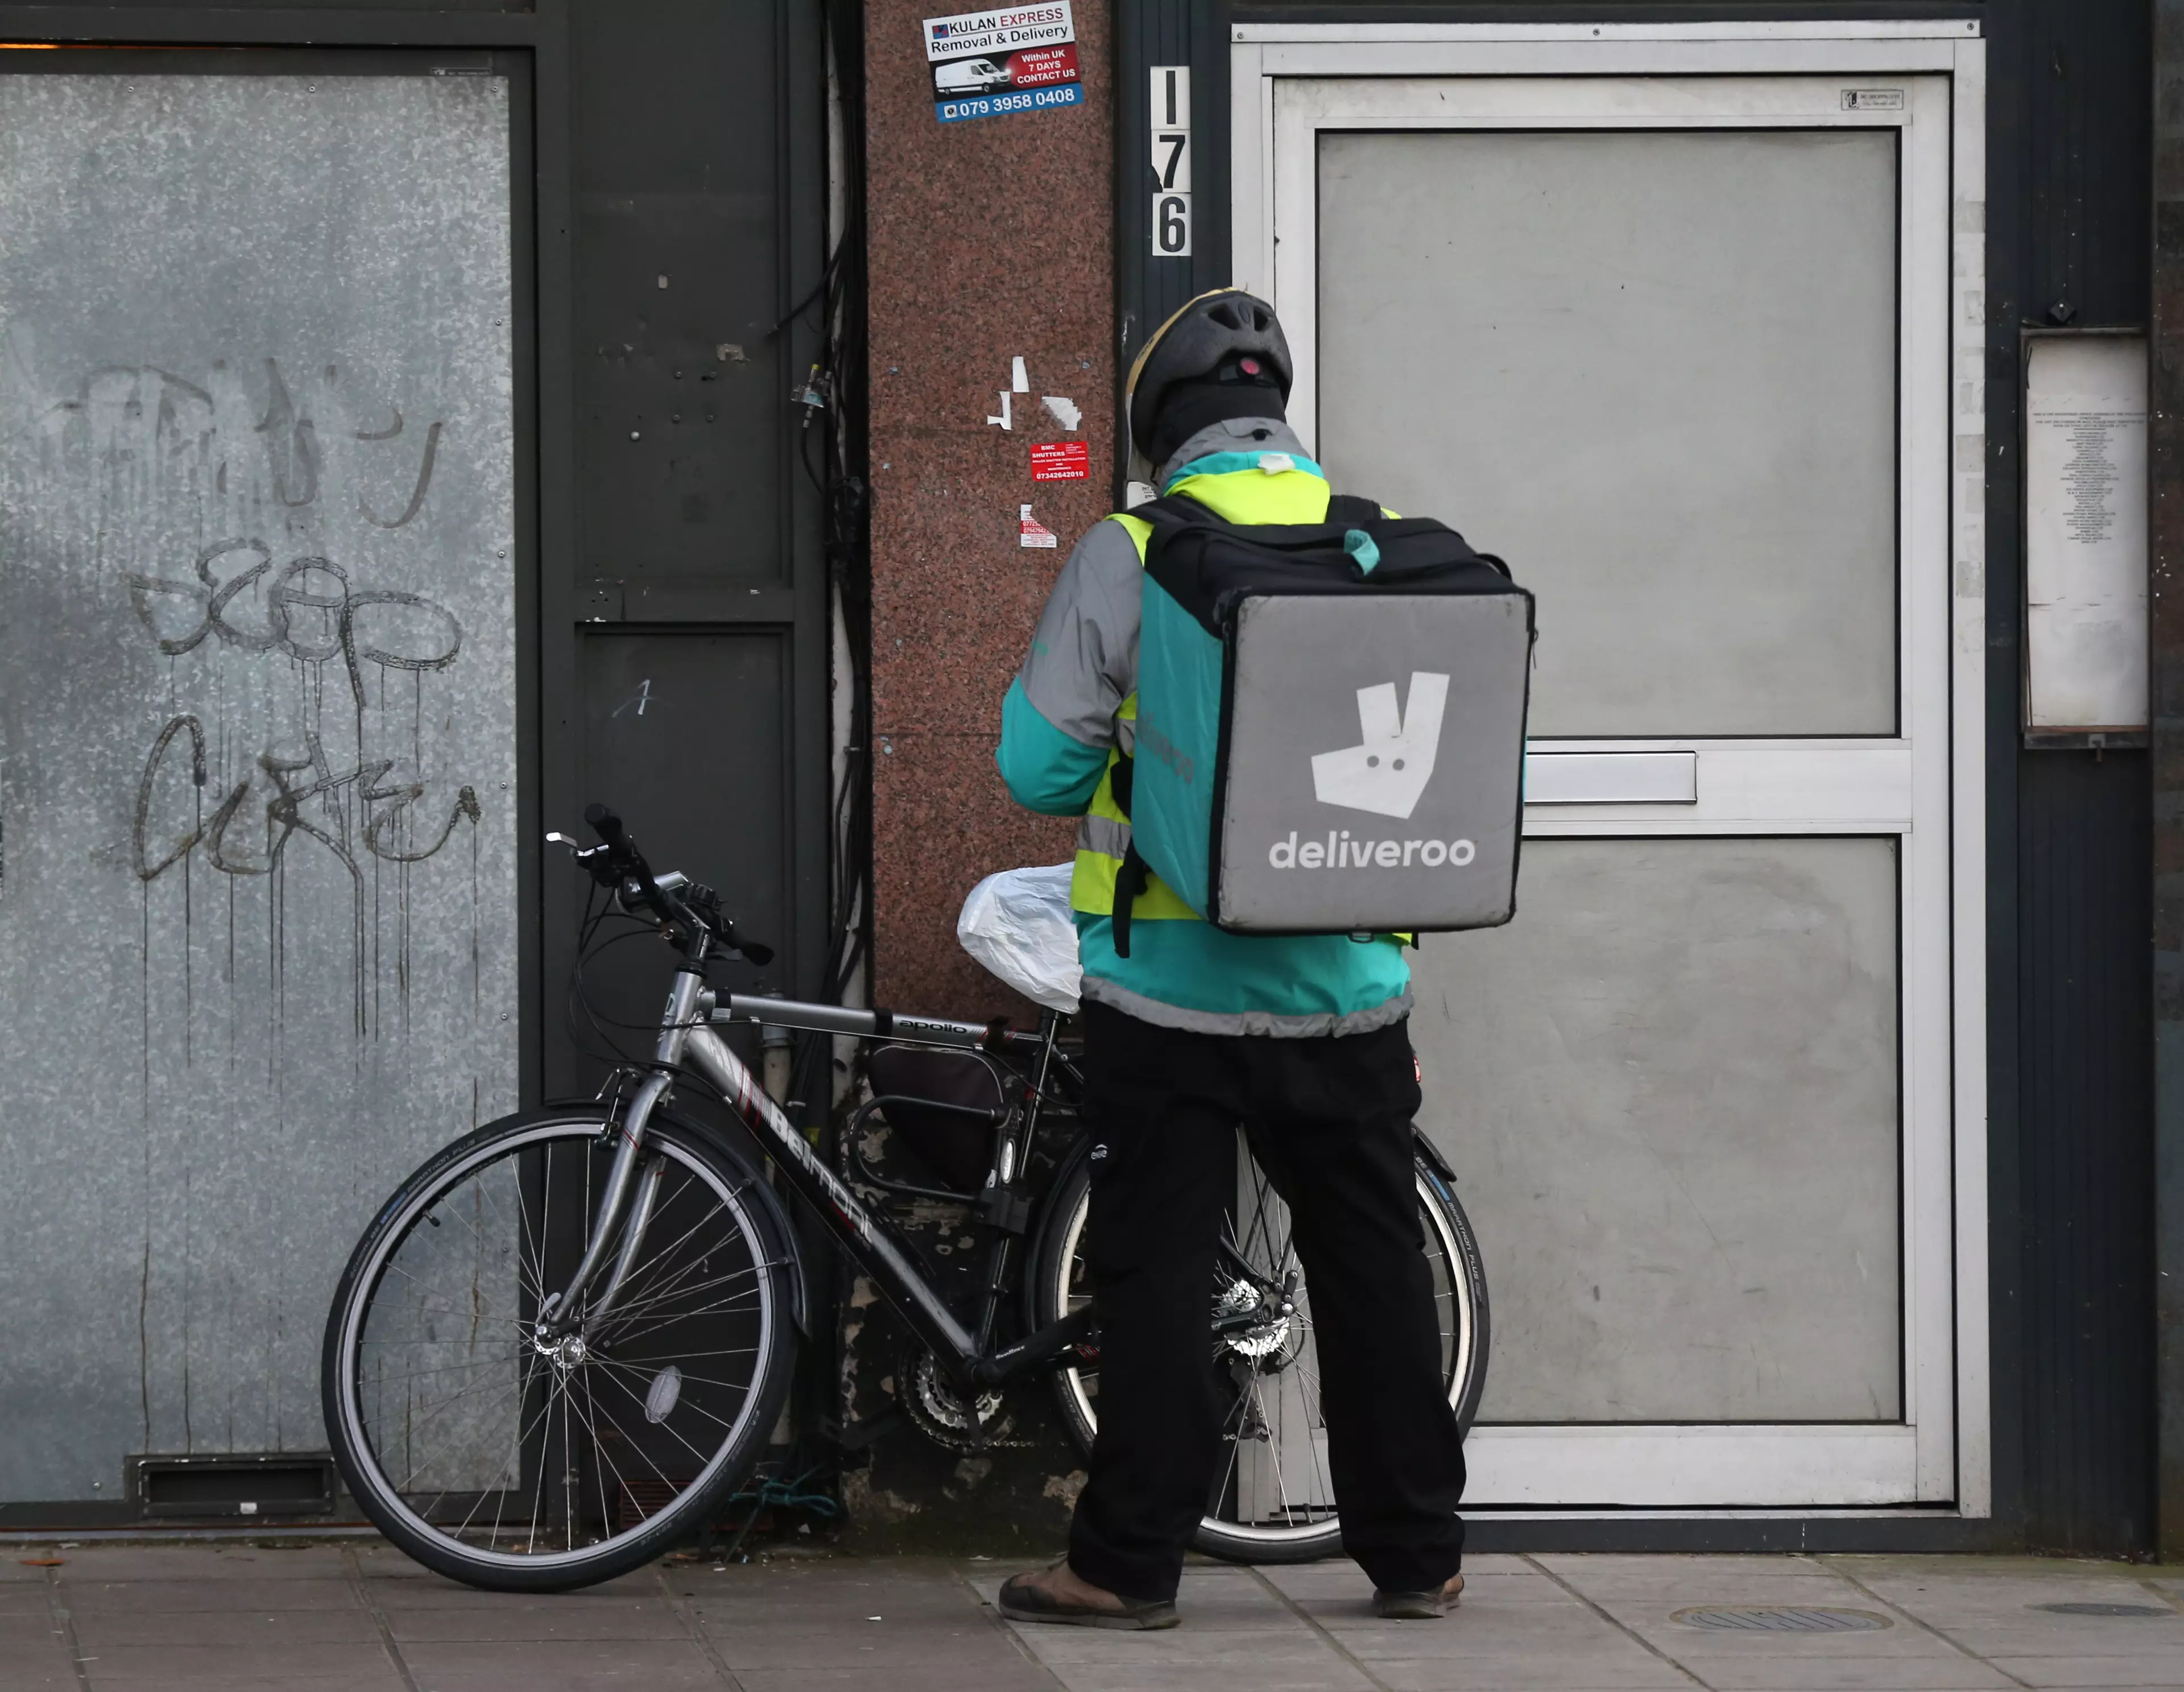 Another trial includes on-demand delivery with Deliveroo.